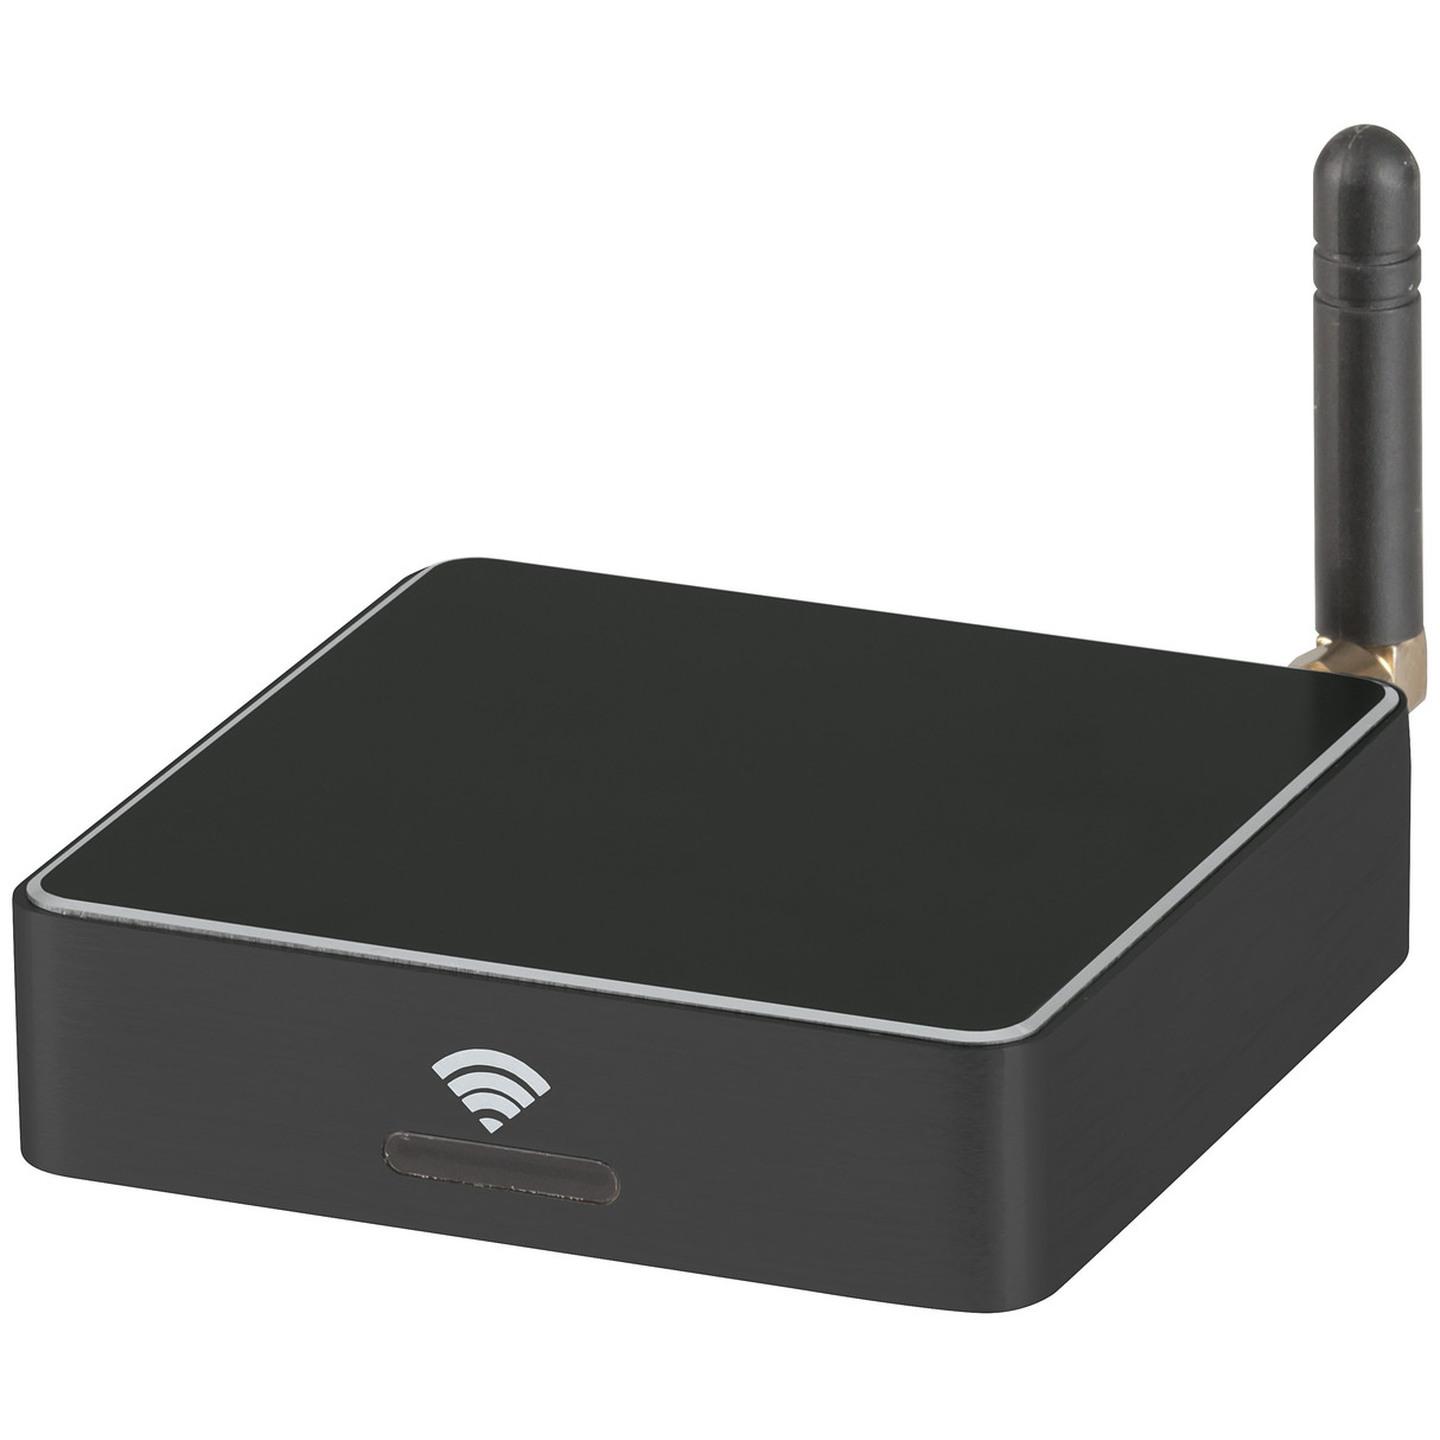 Wi-Fi Audio Receiver with TOSLINK and Stereo Output